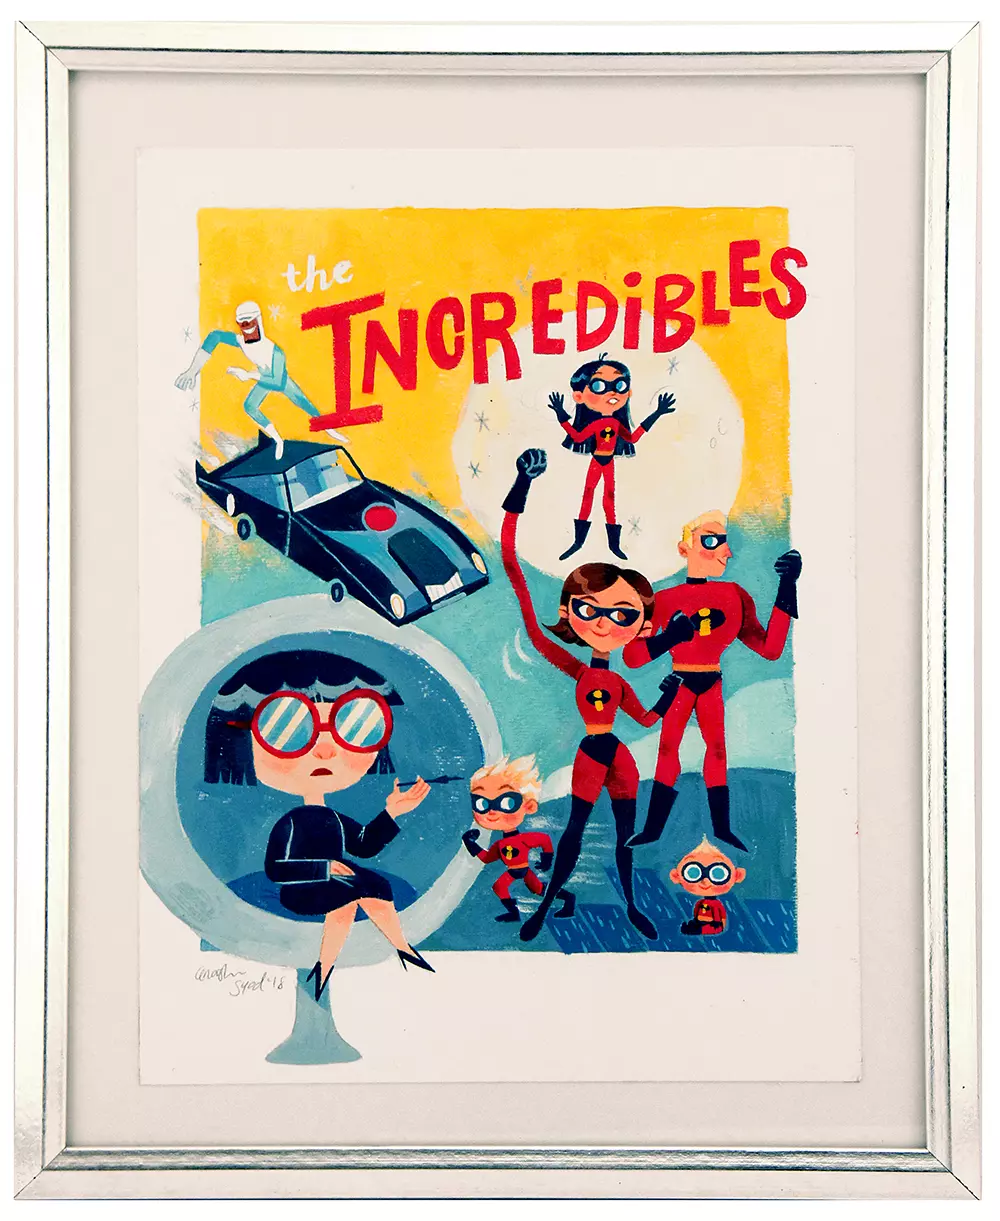 The Incredibles!, Anoosha Syed